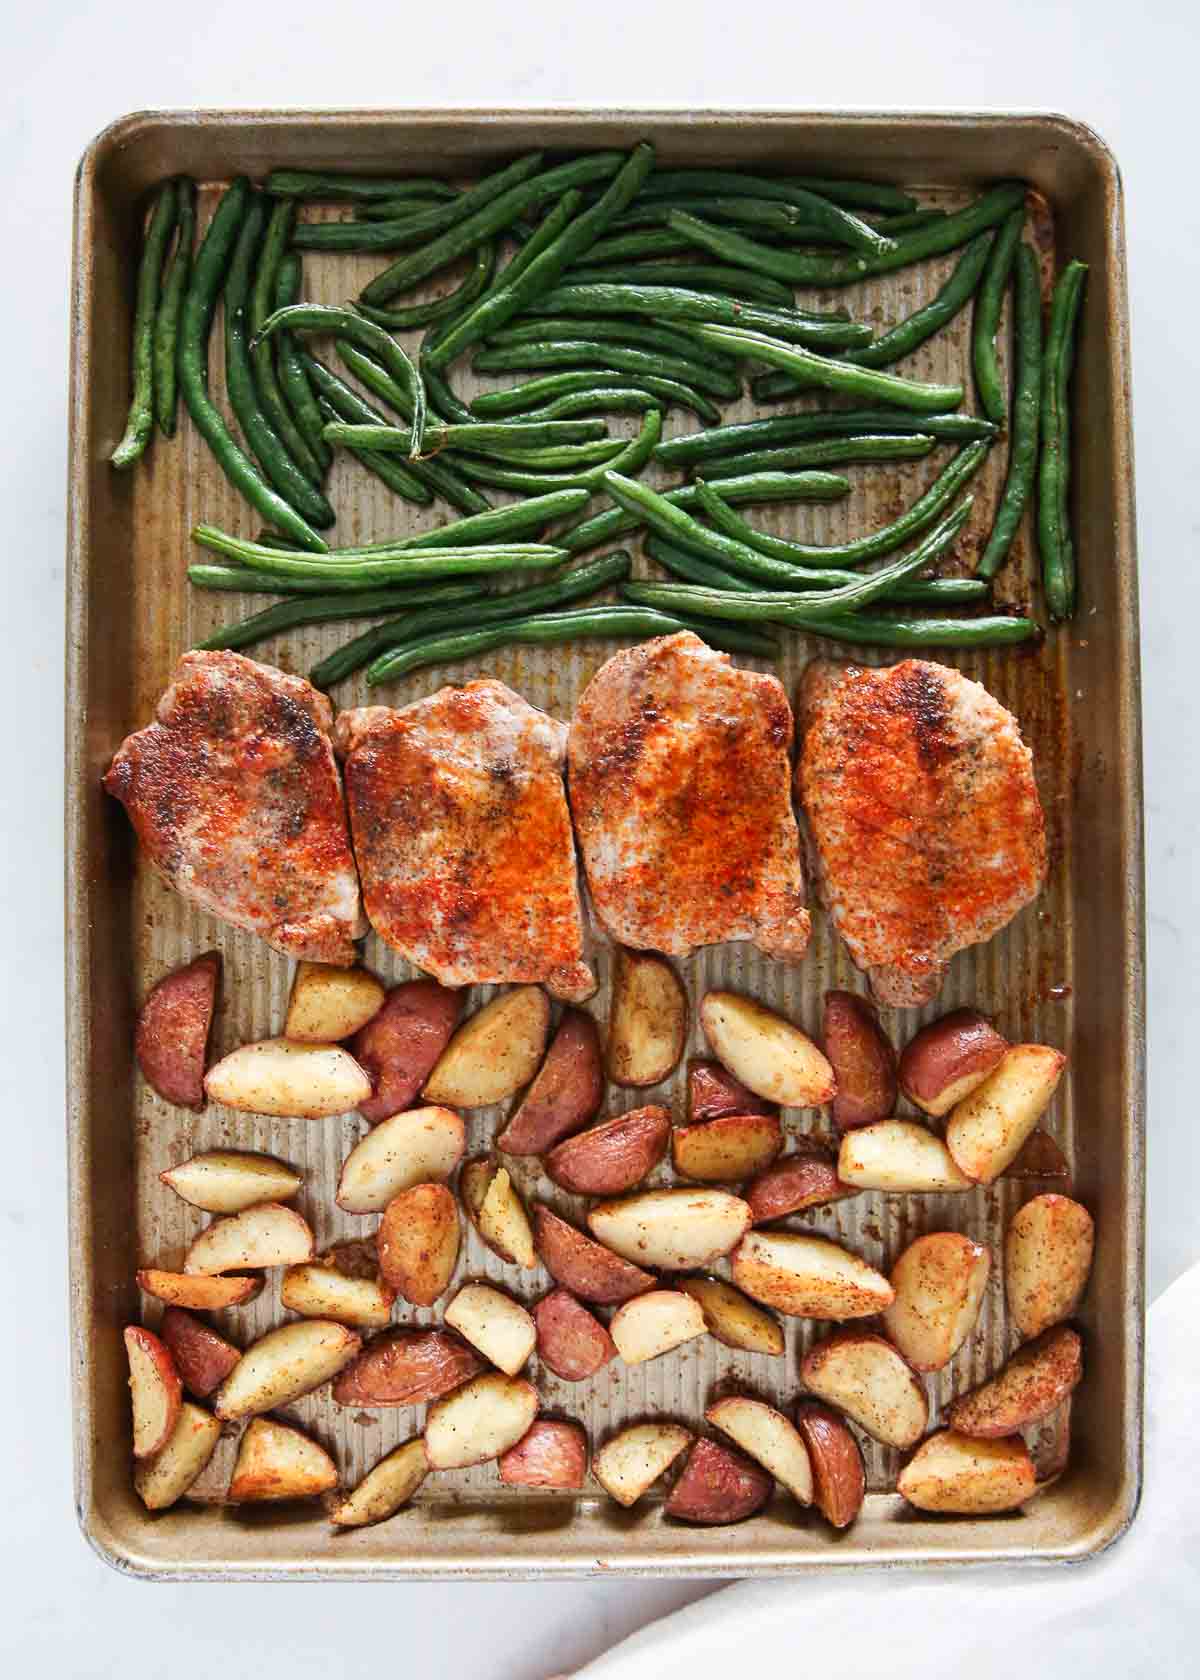 Sheet pan pork chops with potatoes and green beans.